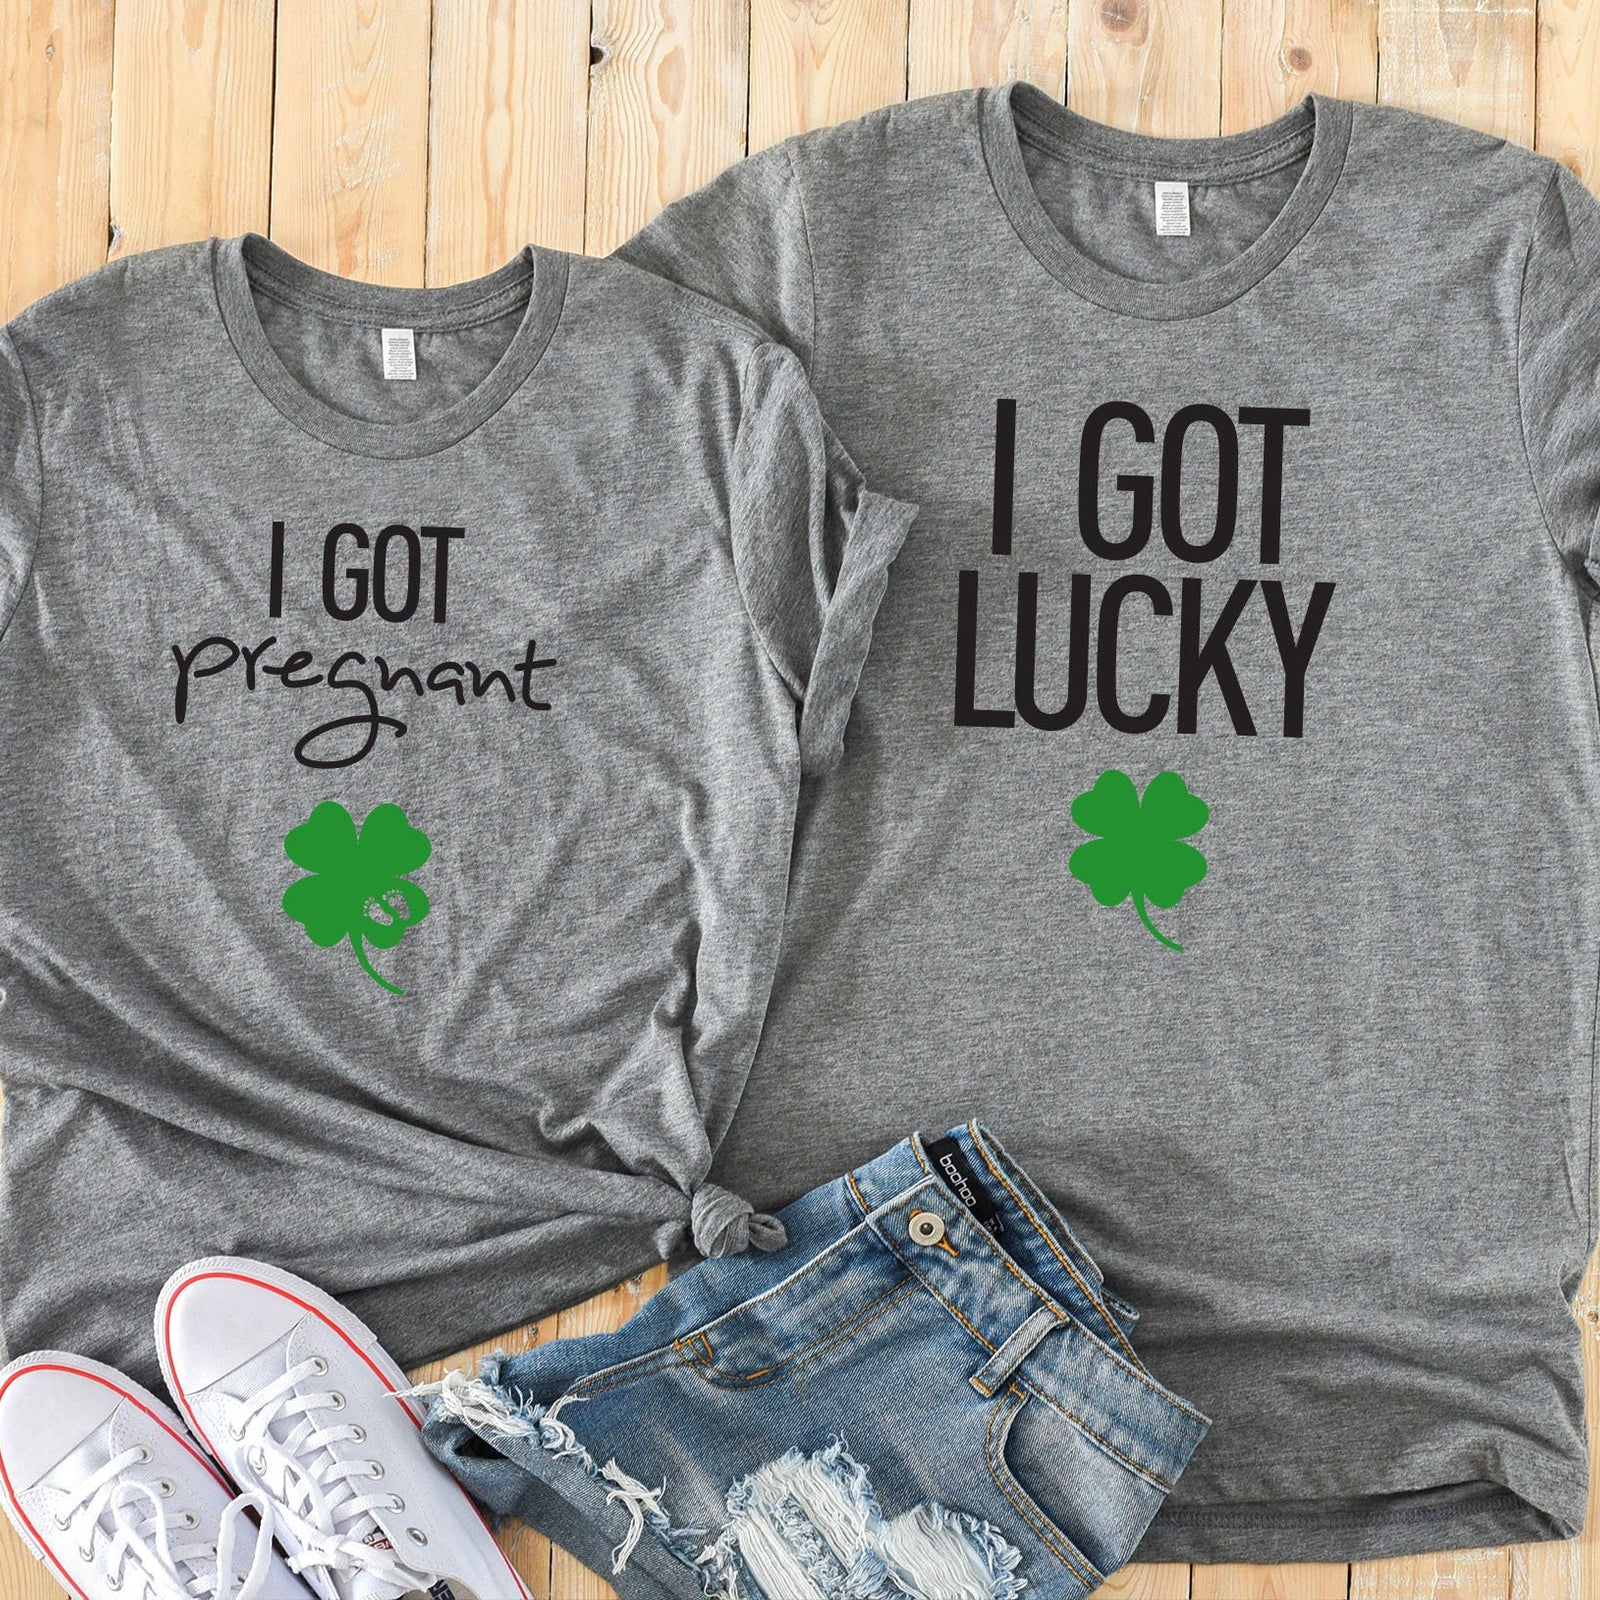 I Got Pregnant and I got Lucky Matching Shirts - Cute Pregnancy Announcement - St. Patrick's Day - Baby Reveal